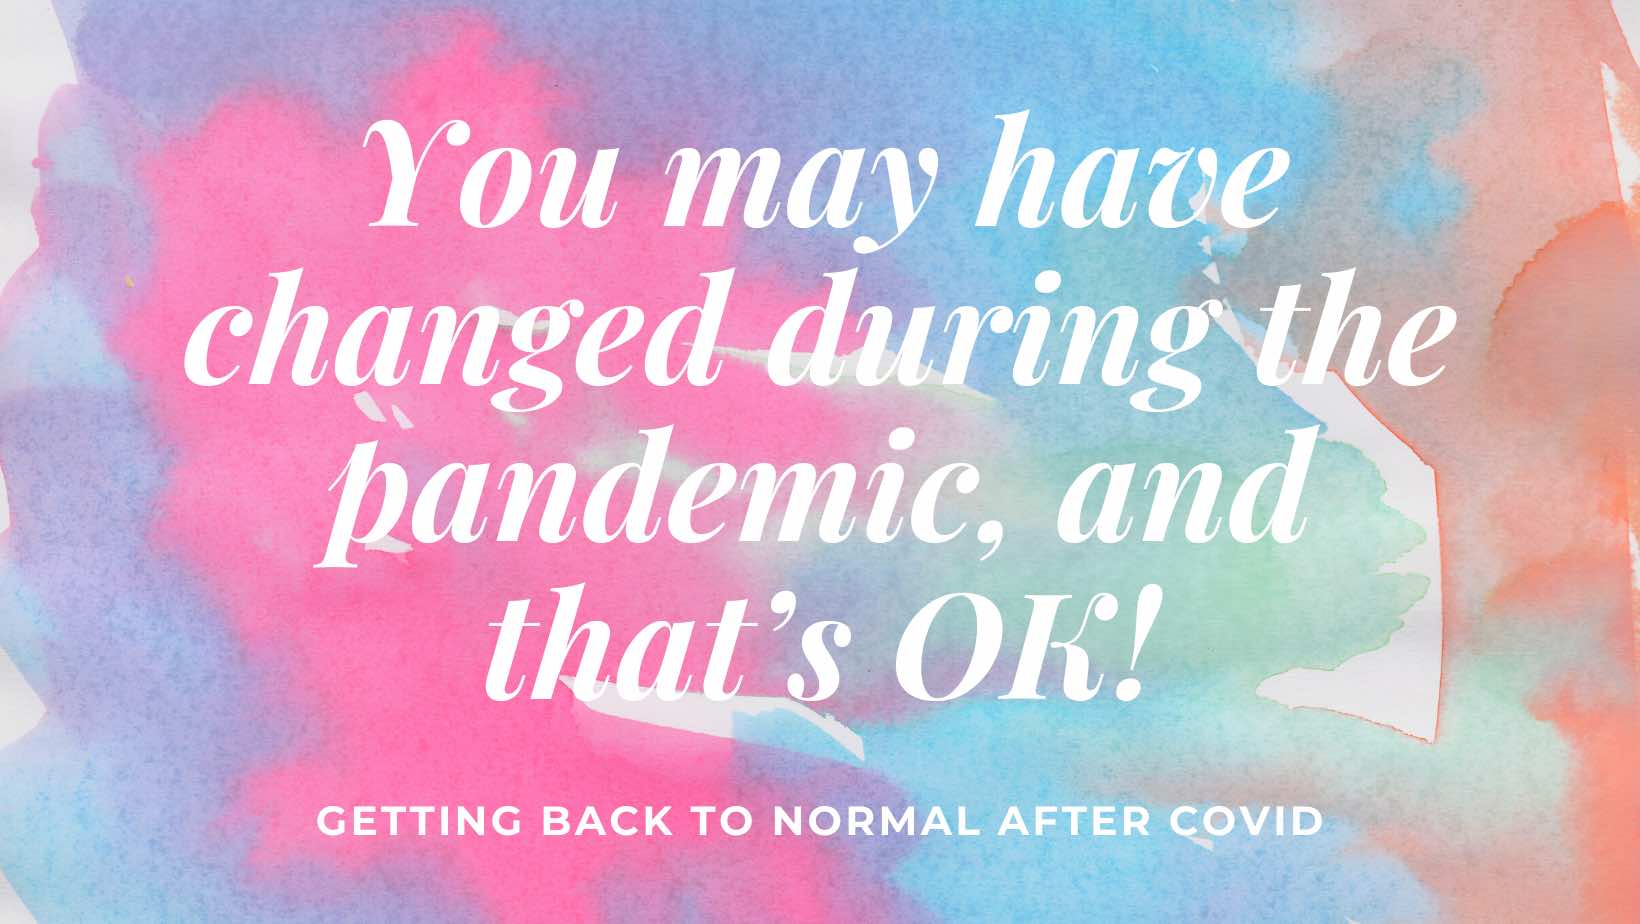 A graphic about getting back to normal after COVID by acknowledging that you've changed during the pandemic and it's ok!